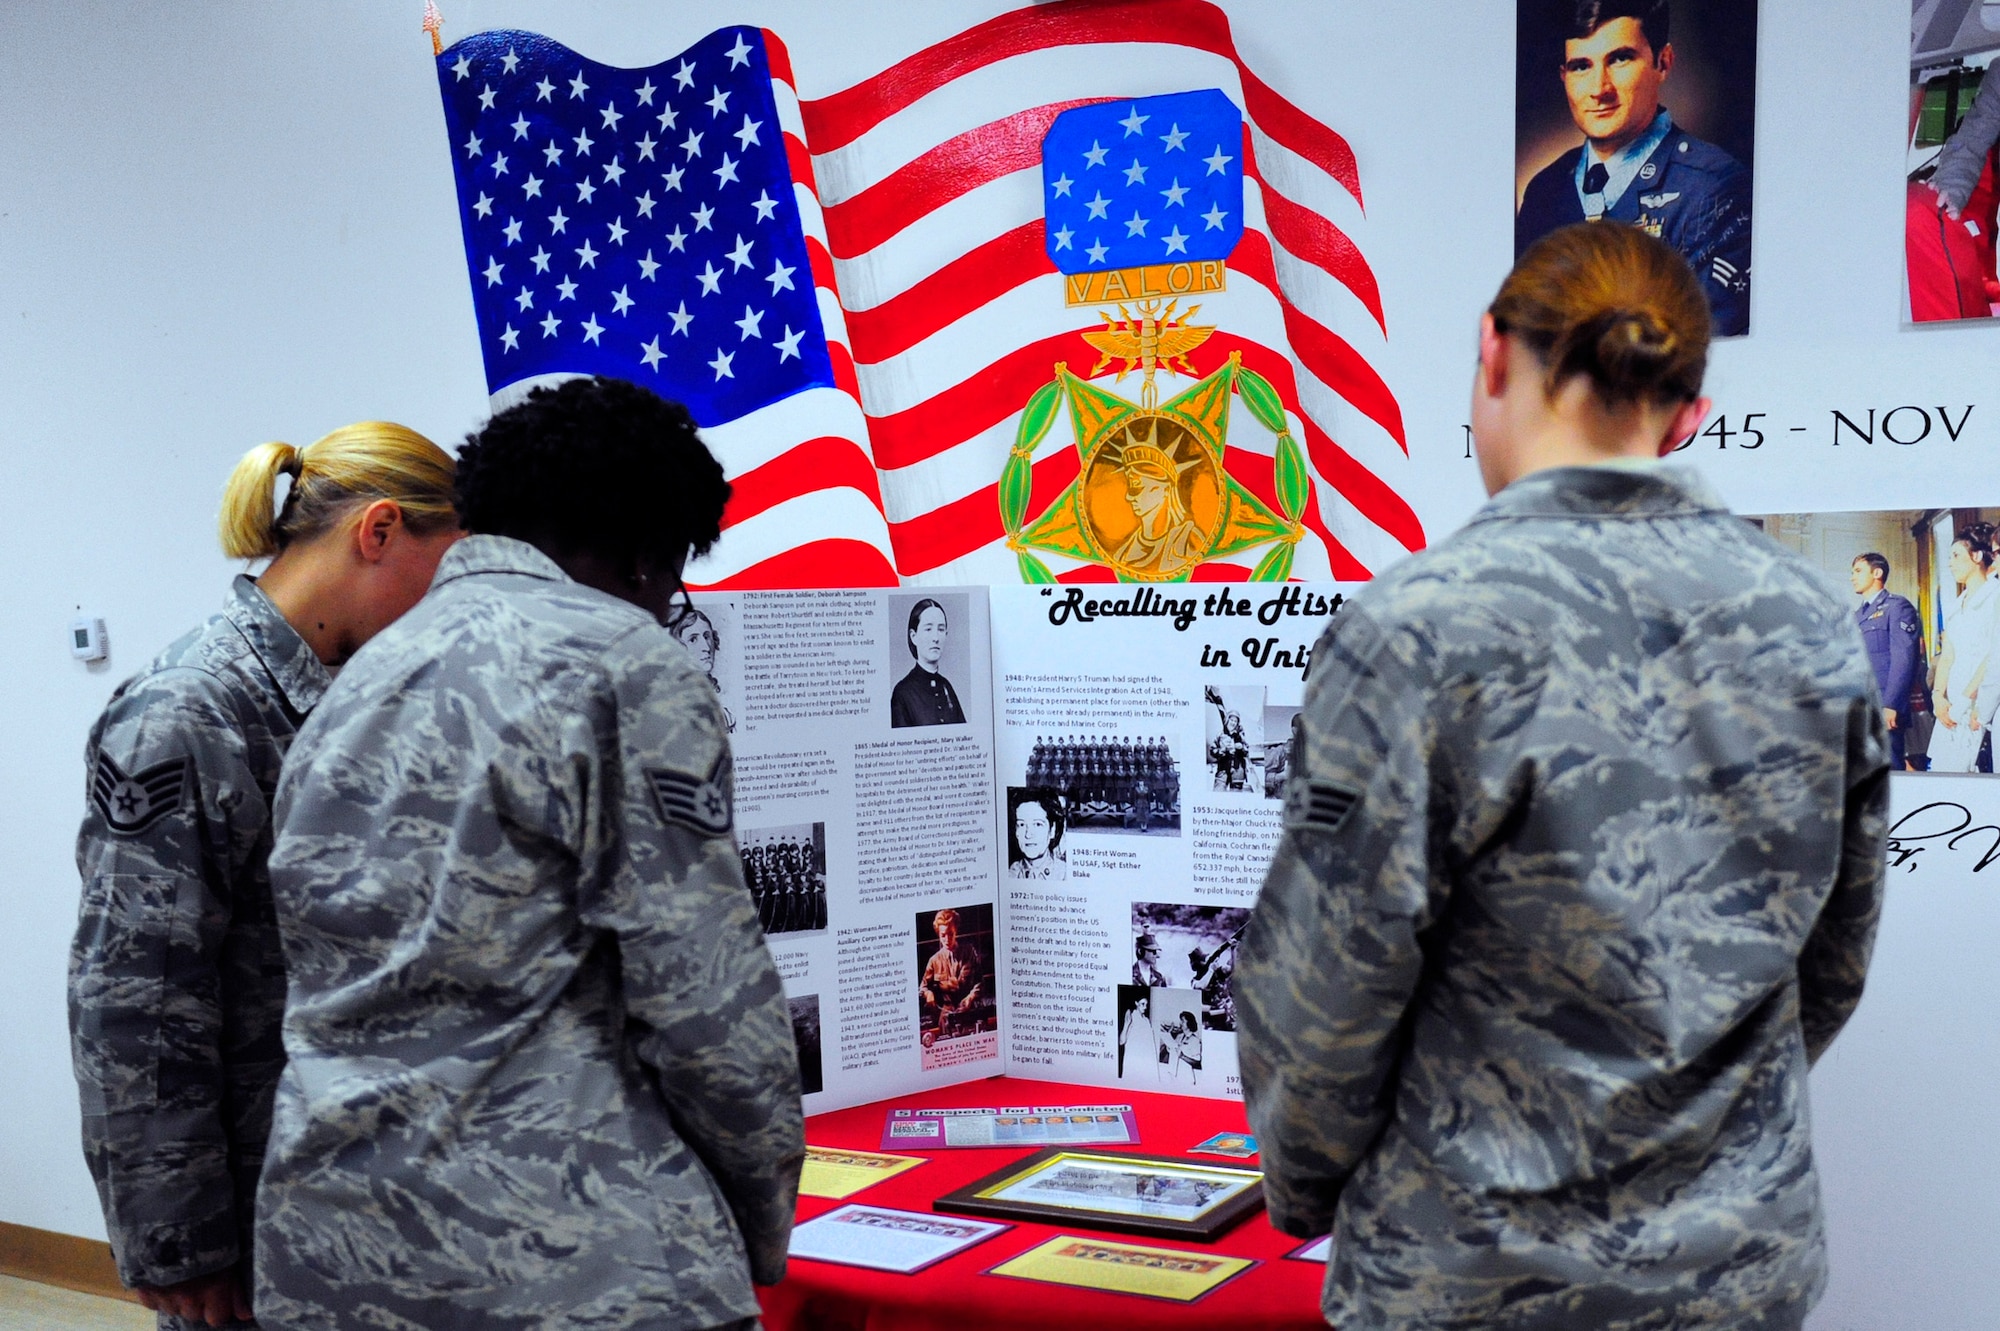 Posters of females in the U.S. military were placed throughout the room during the 380th Air Expeditionary Wing Women's History Month symposium luncheon March 28 at an air base in Southwest Asia. The theme, "Recalling Women in Uniform" highlighted the contributions of female Airmen and Soldiers both past and present. (U.S. Air Force photo/Capt. Jennifer Pearson) 
